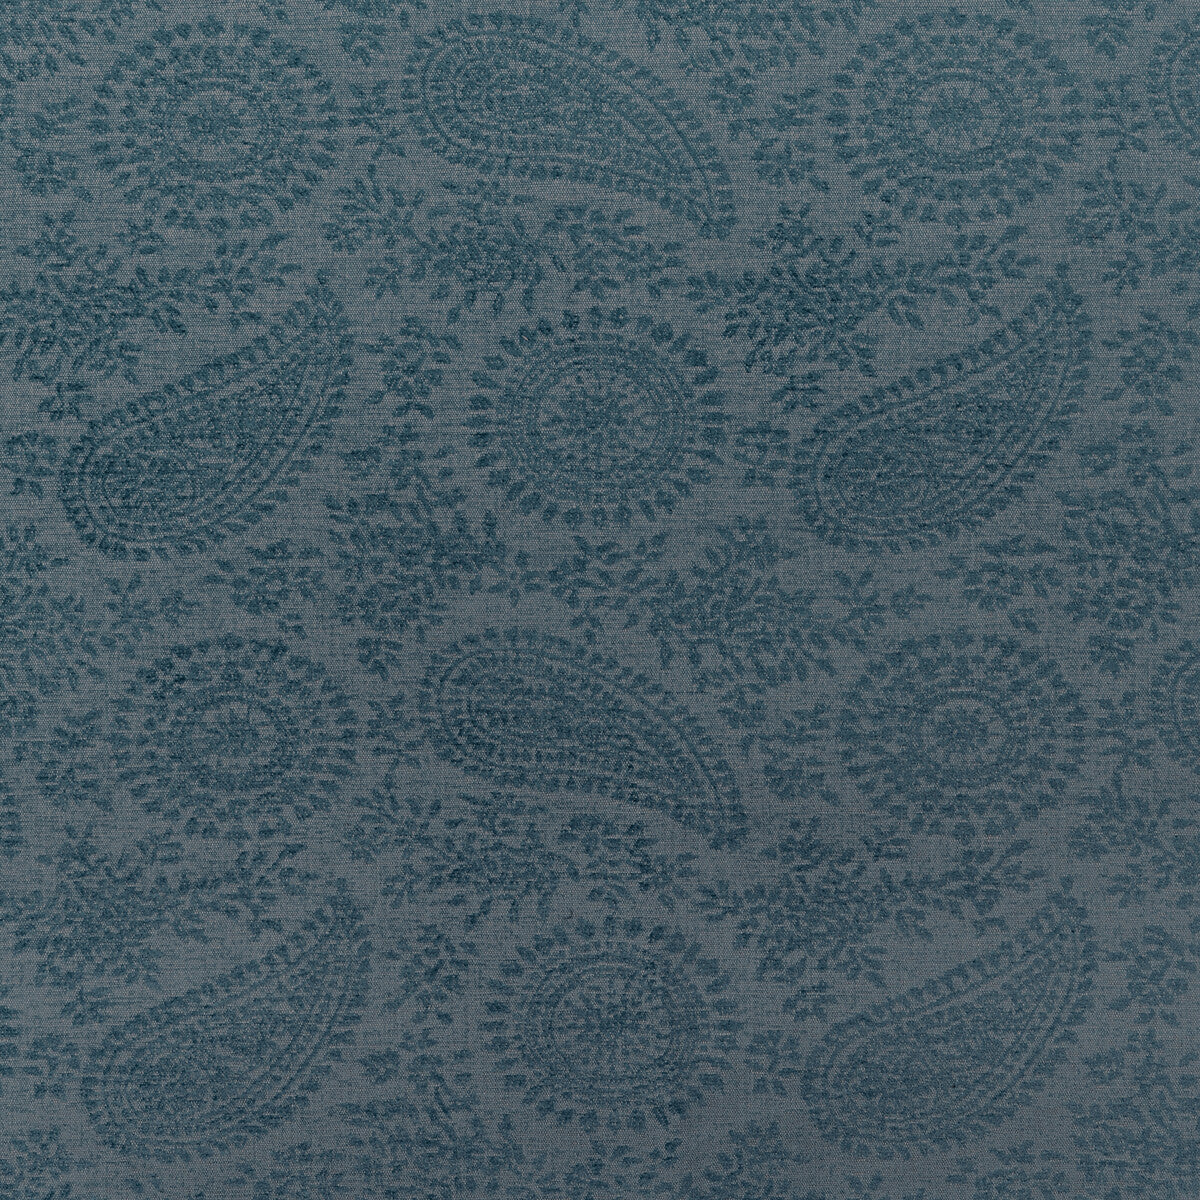 Wylder fabric in fountain color - pattern 36269.5.0 - by Kravet Contract in the Gis Crypton collection